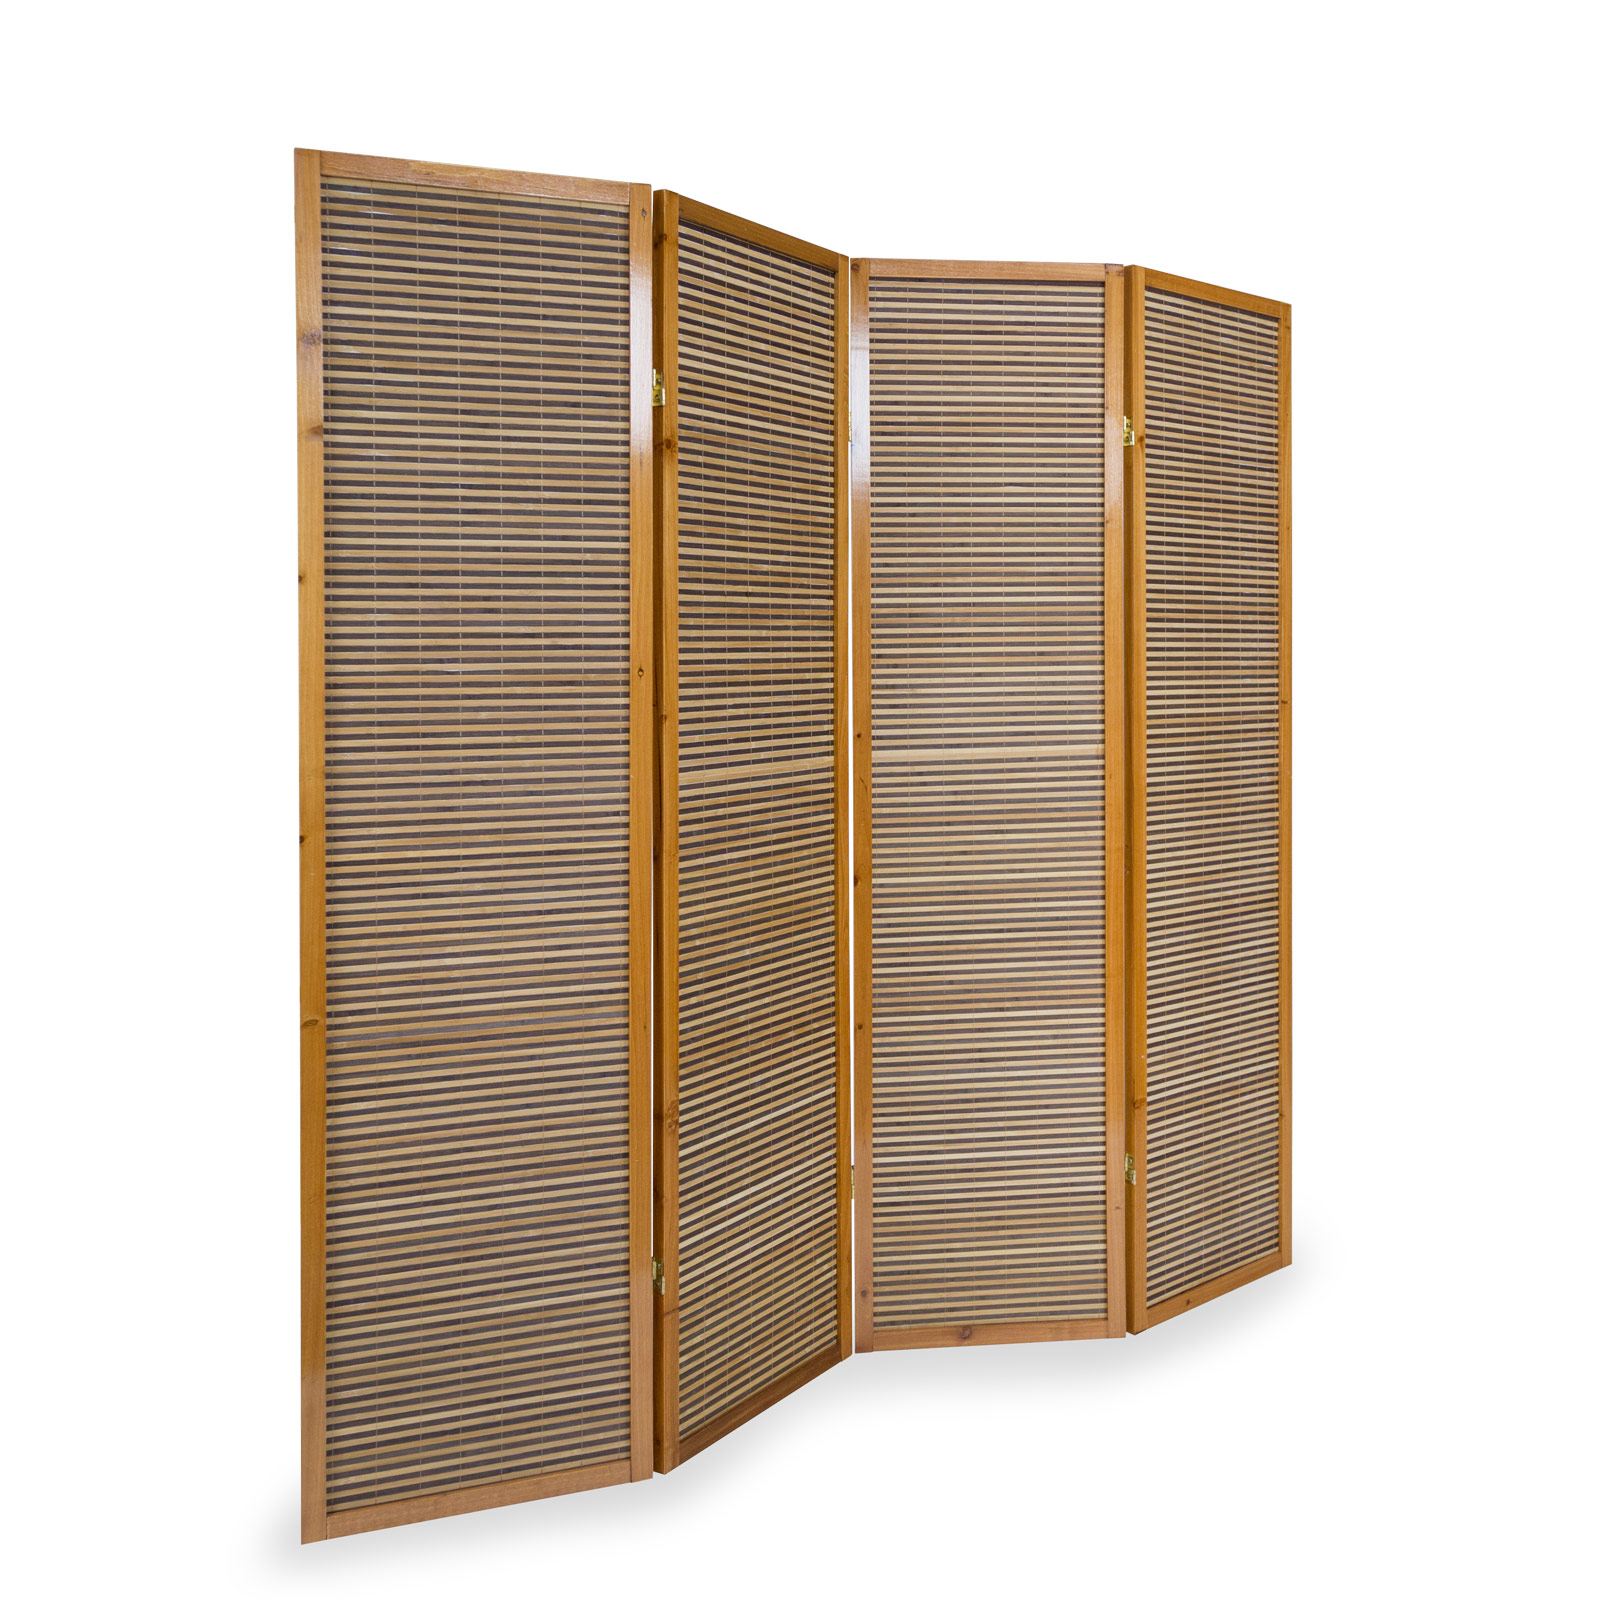 Paravent Room Divider 4 Parts Wood Privacy Screen Brown